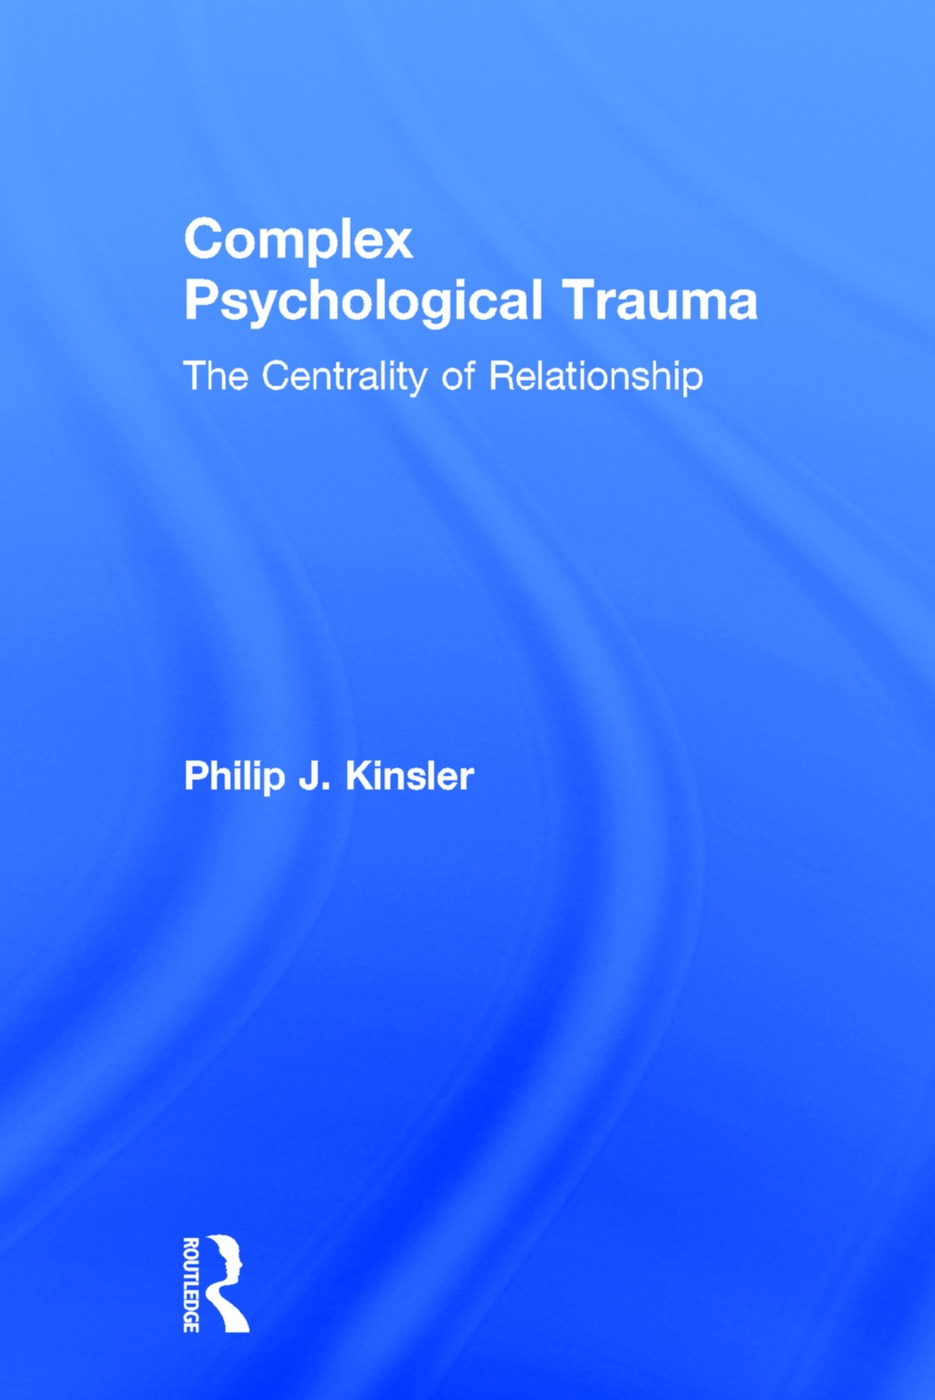 Complex Psychological Trauma: The Centrality of Relationship